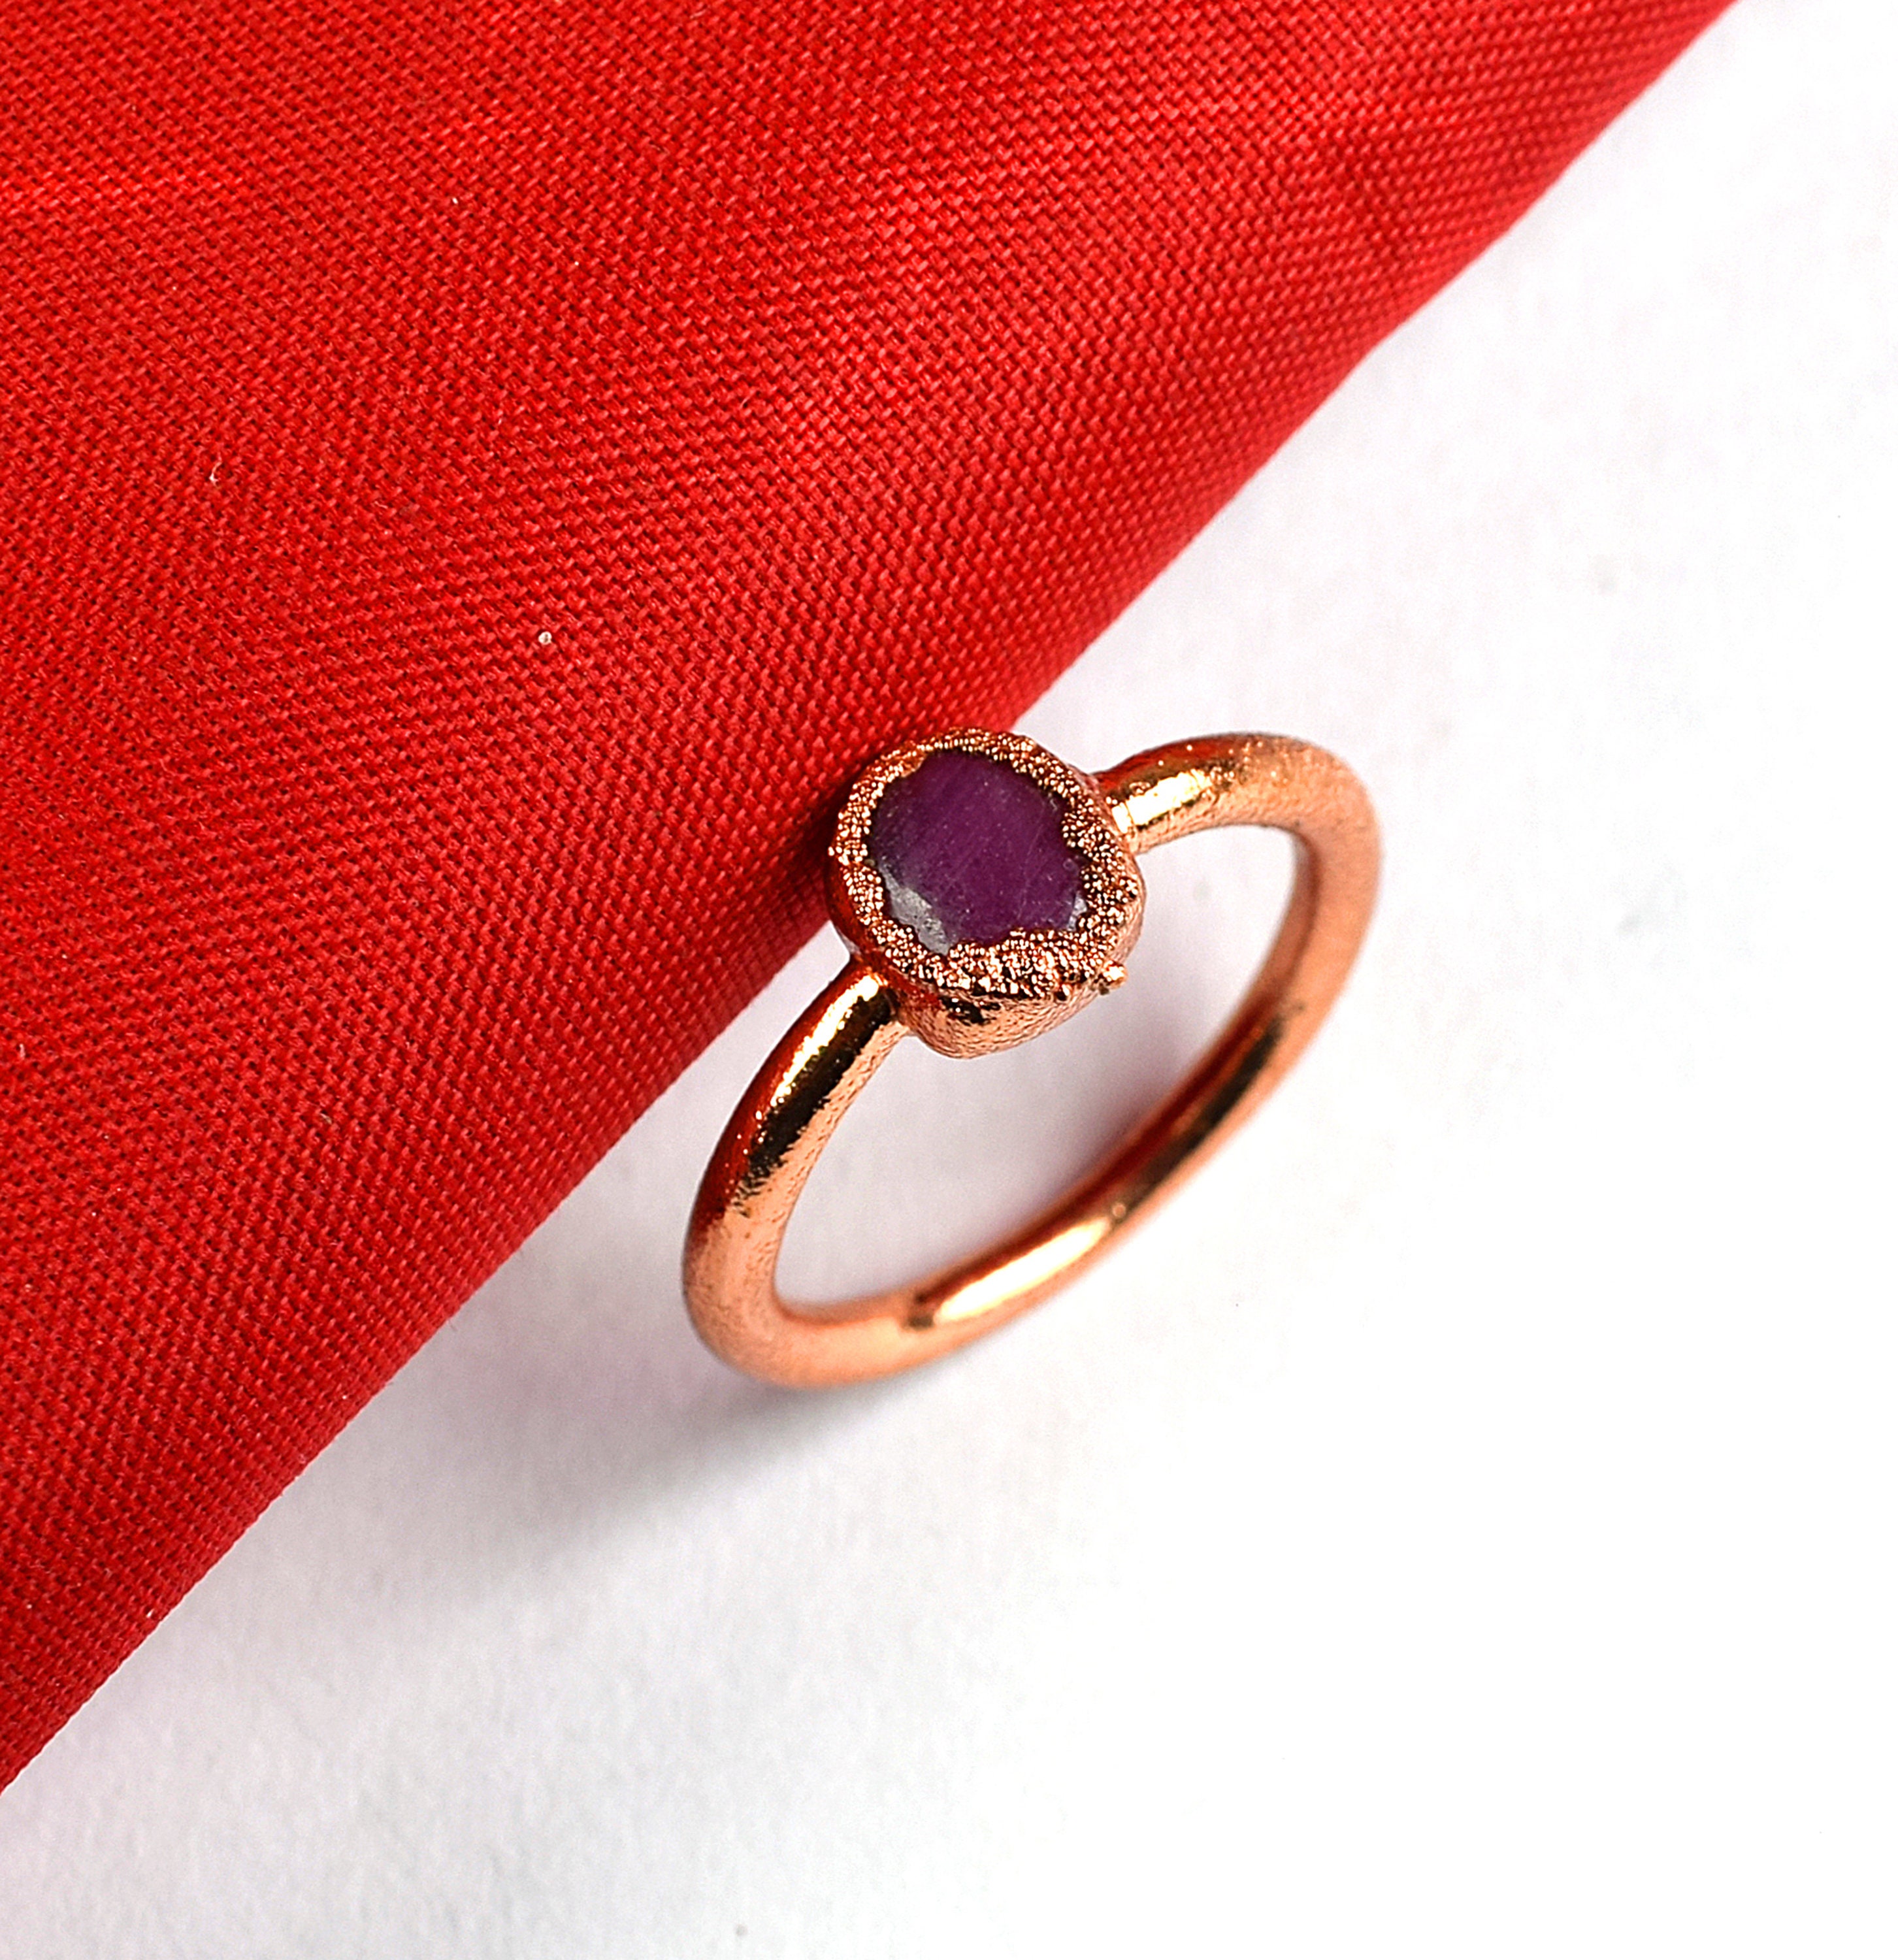 Astrological Rituals For Wearing A Ruby (Manik) Gemstone